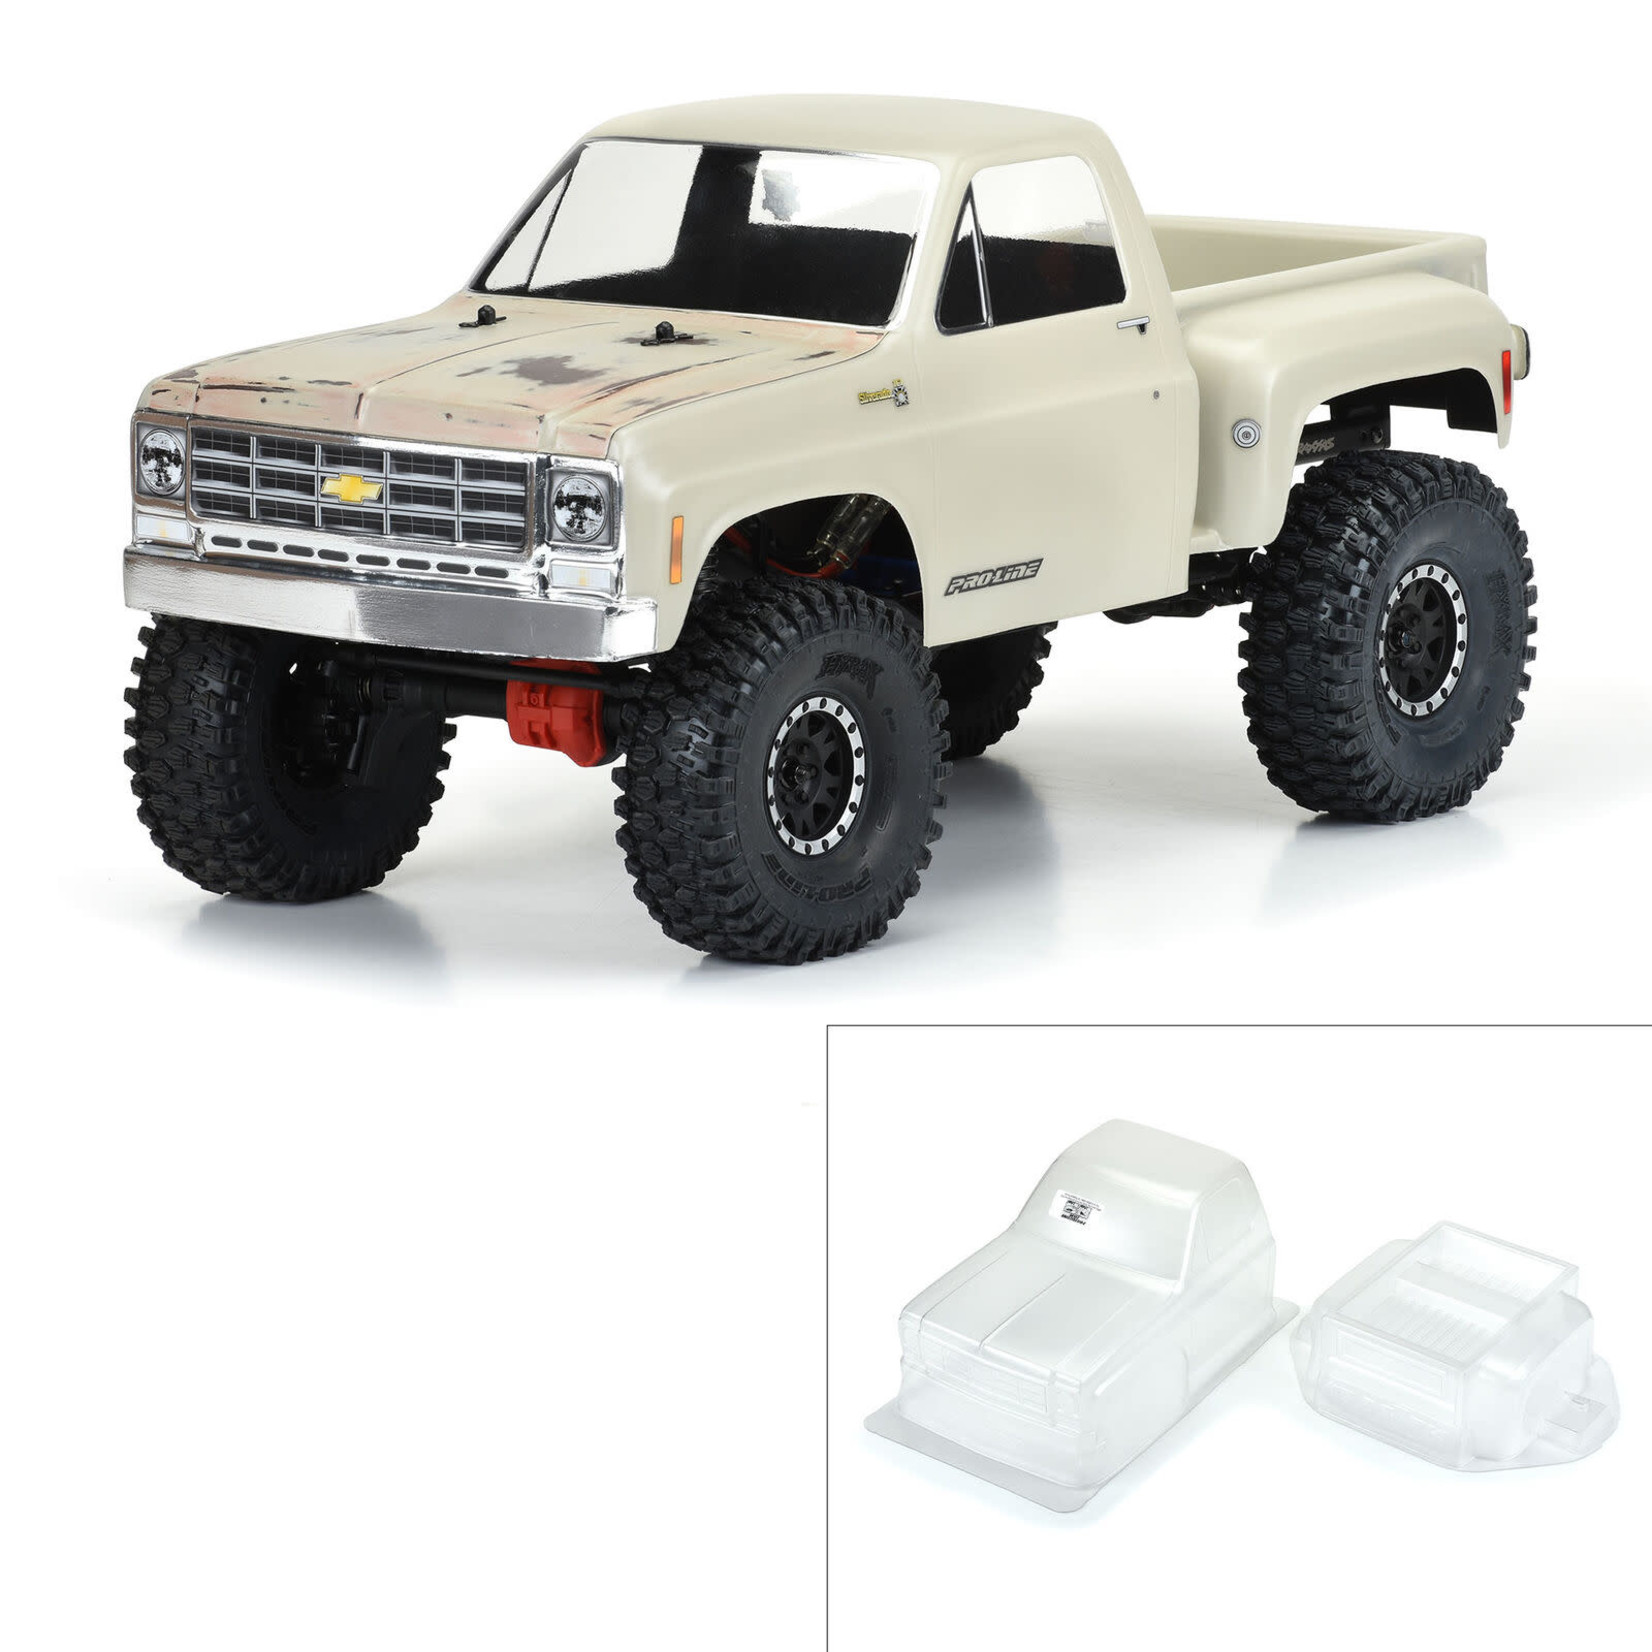 Pro-line Racing PRO352200 Pro-Line 1978 Chevy K-10 Clear Body 12.3" (313mm) WB